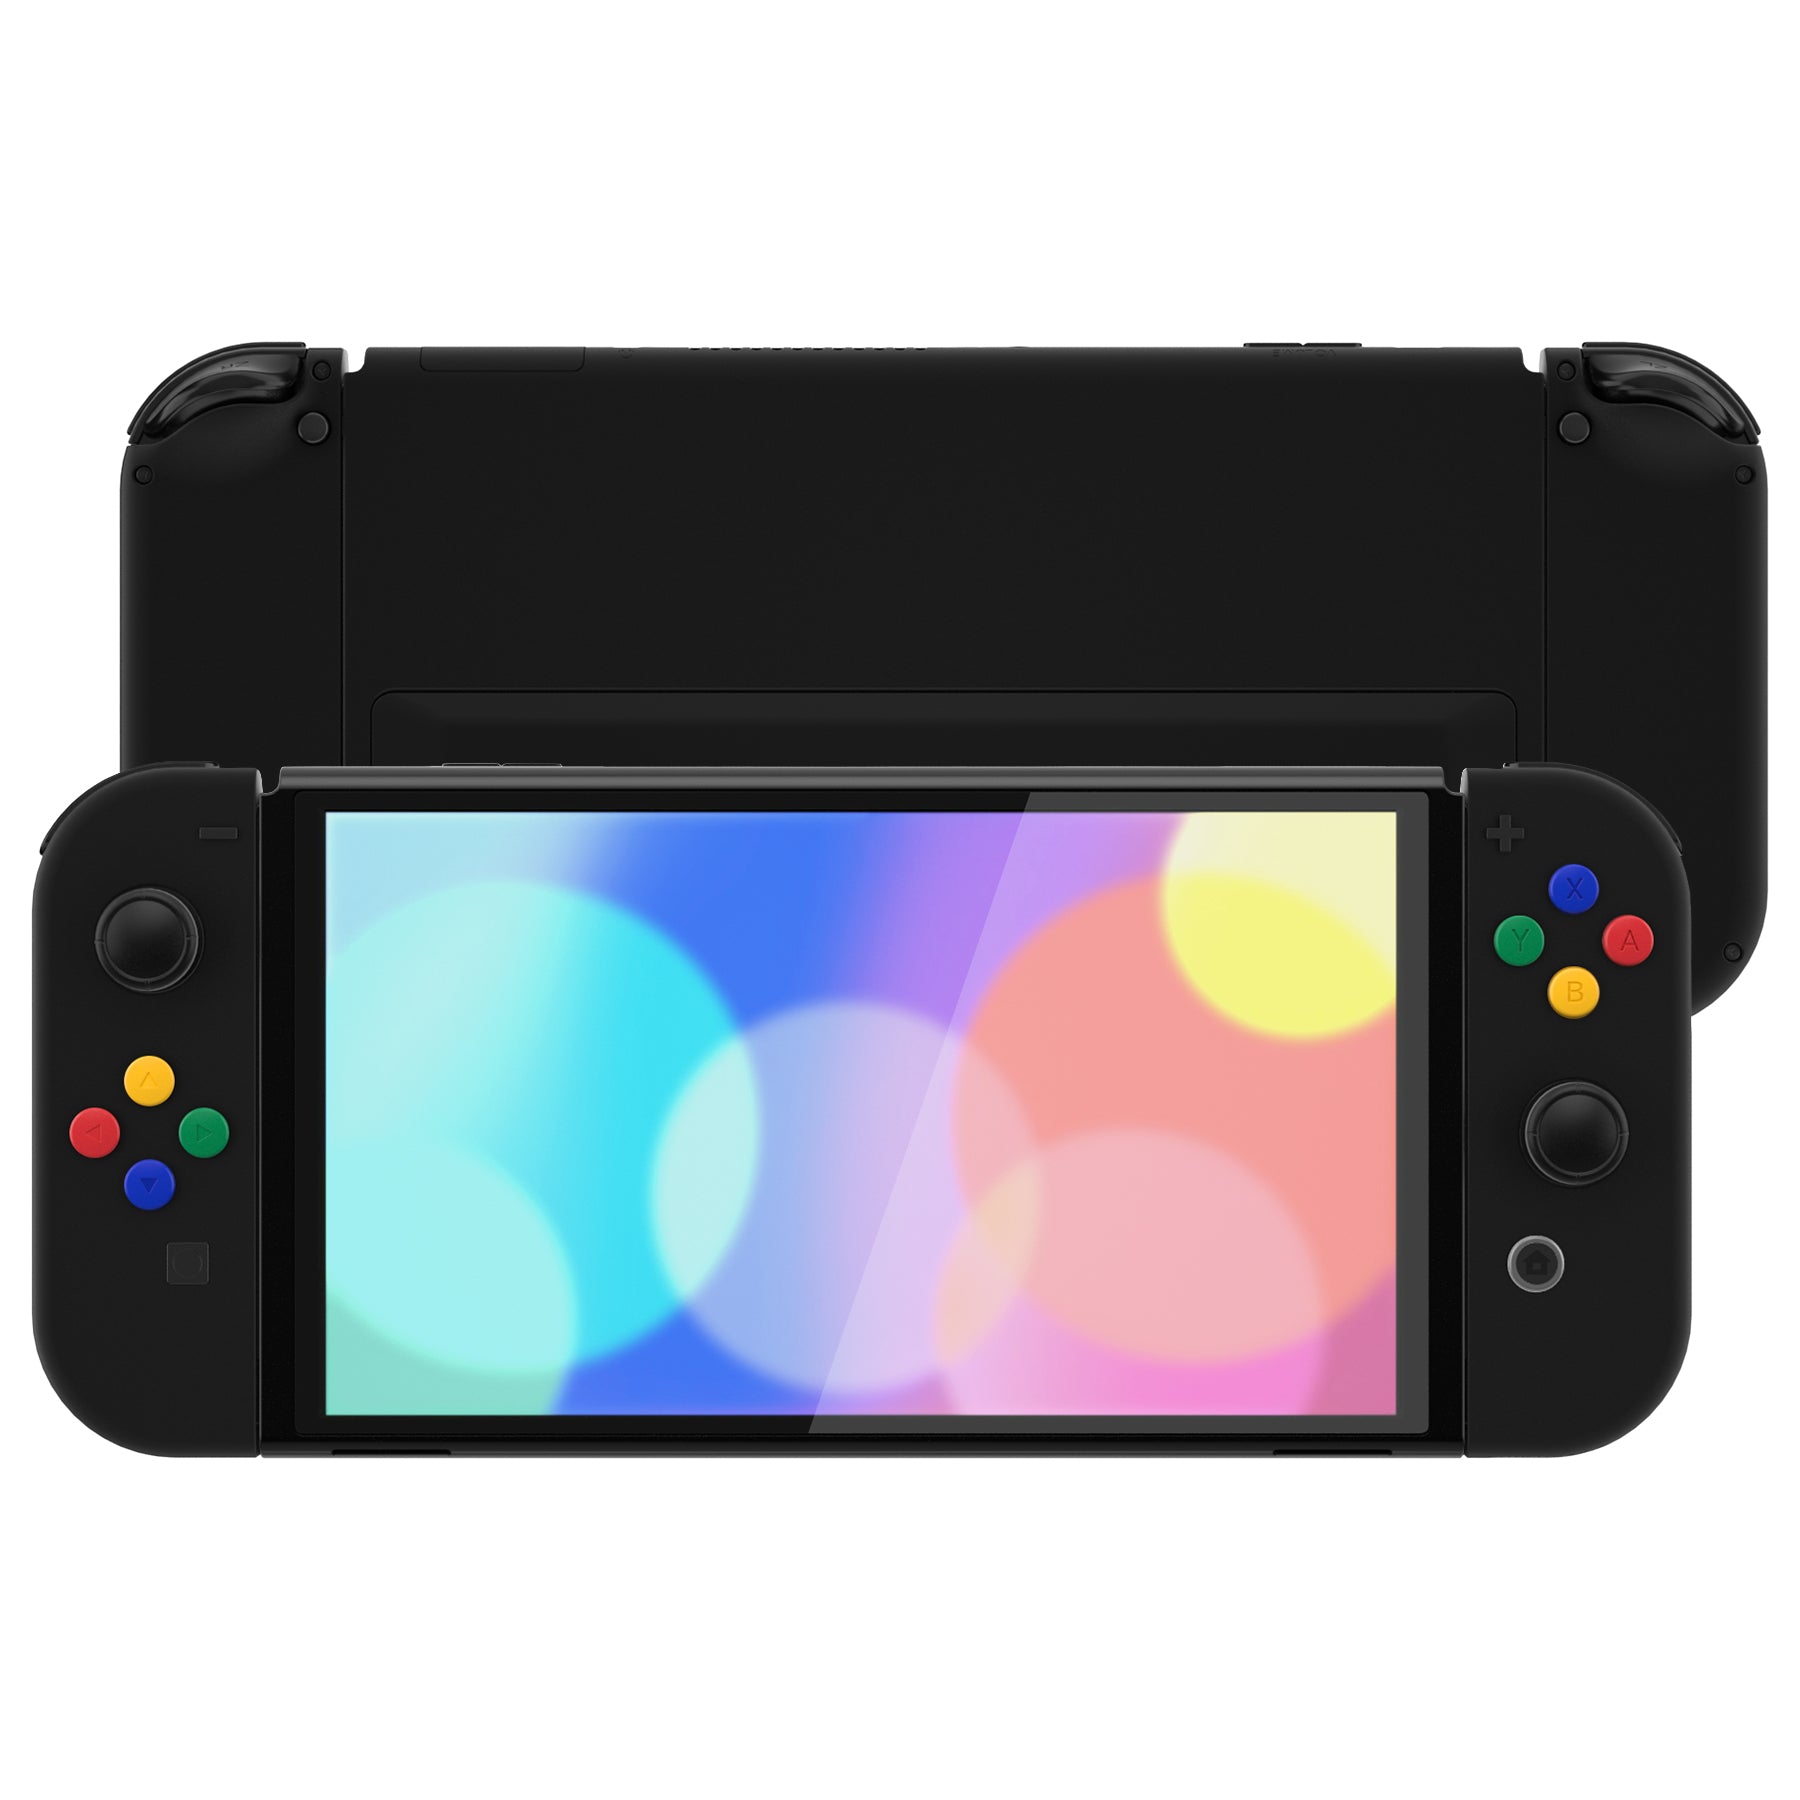 eXtremeRate Custom Replacement Full Set Shell with Buttons for Nintendo Switch OLED - Black eXtremeRate